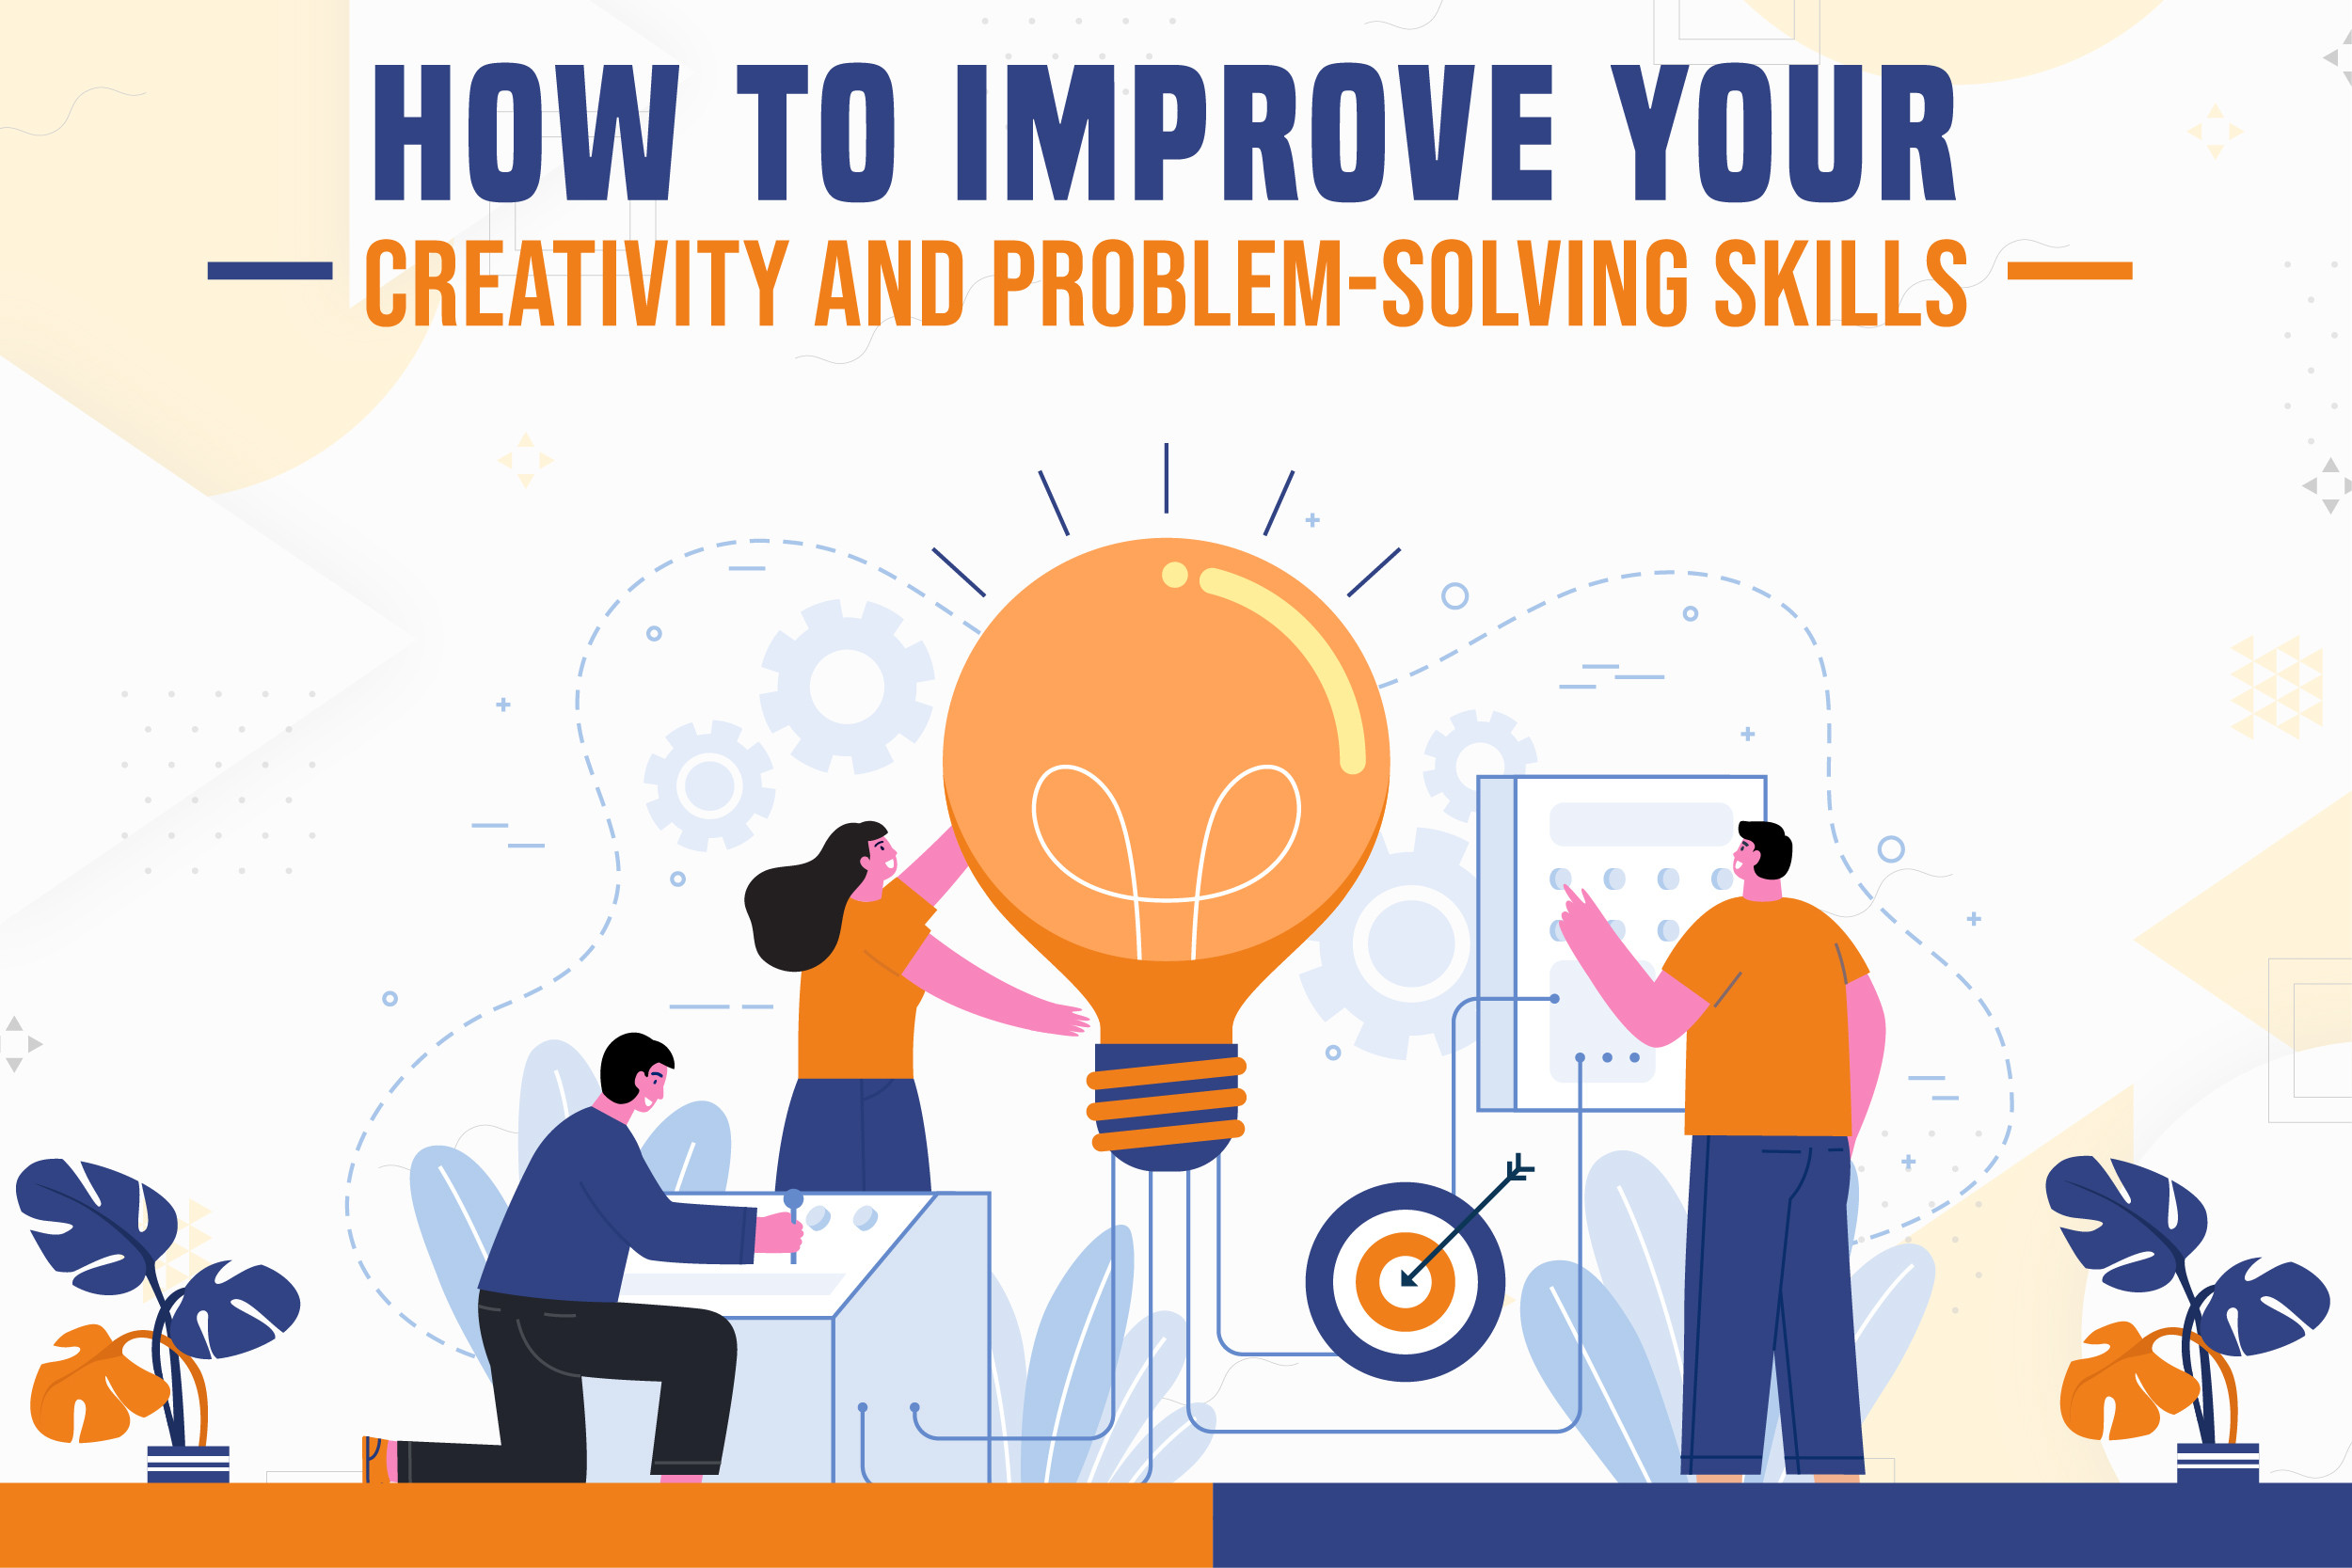 Improves mental creativity and problem-solving ability